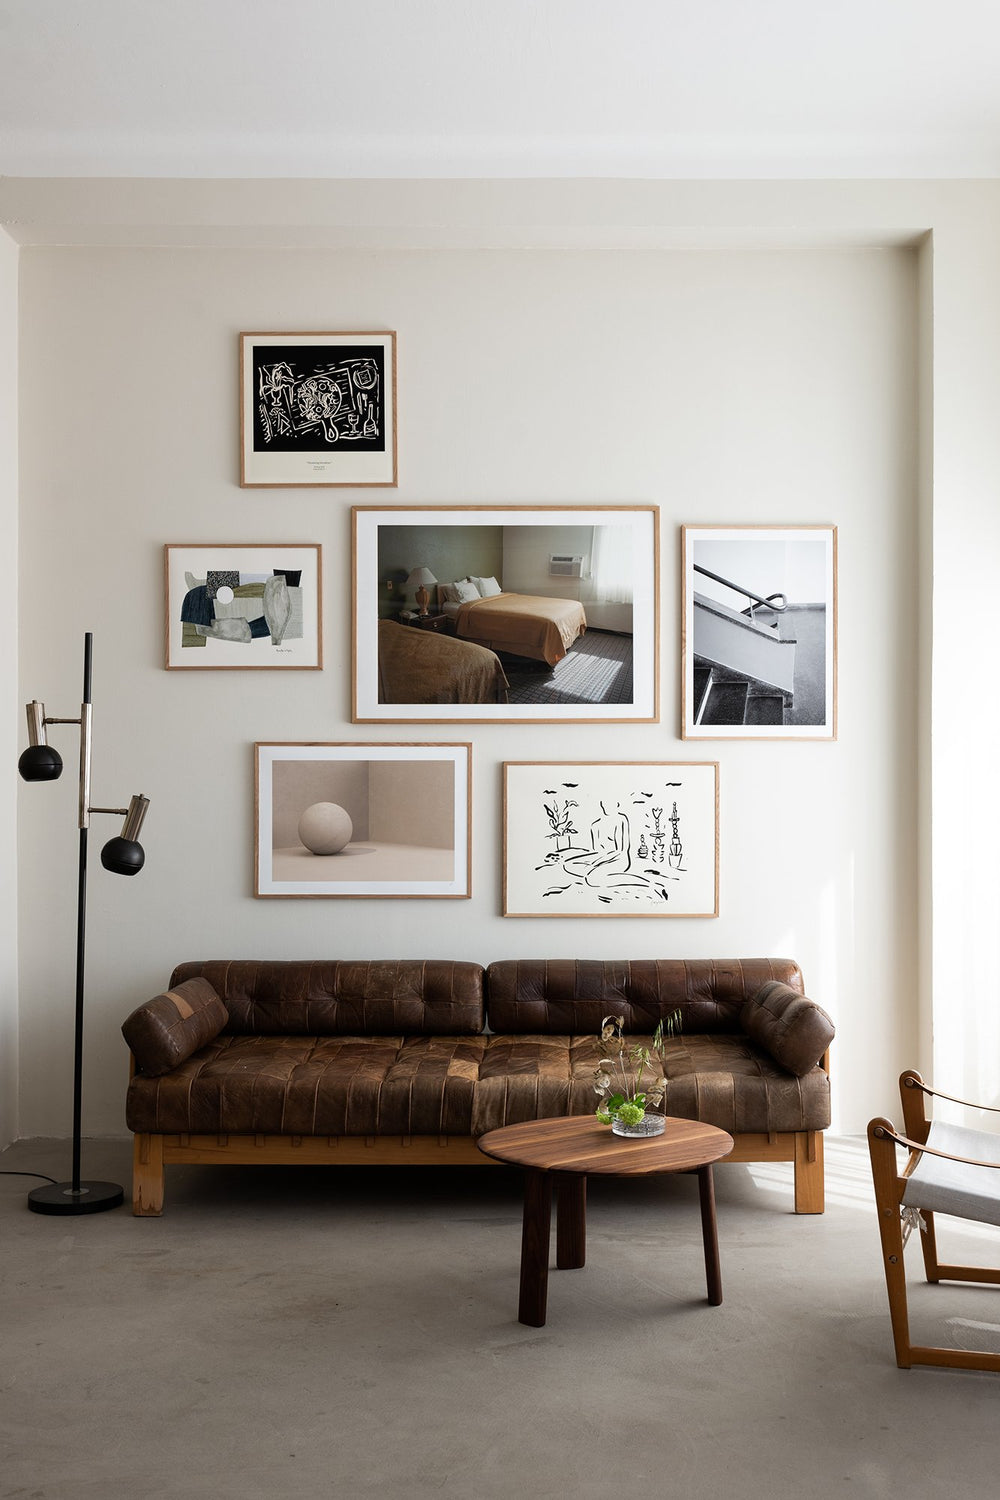 Stylist's note How to make a Gallery Wall